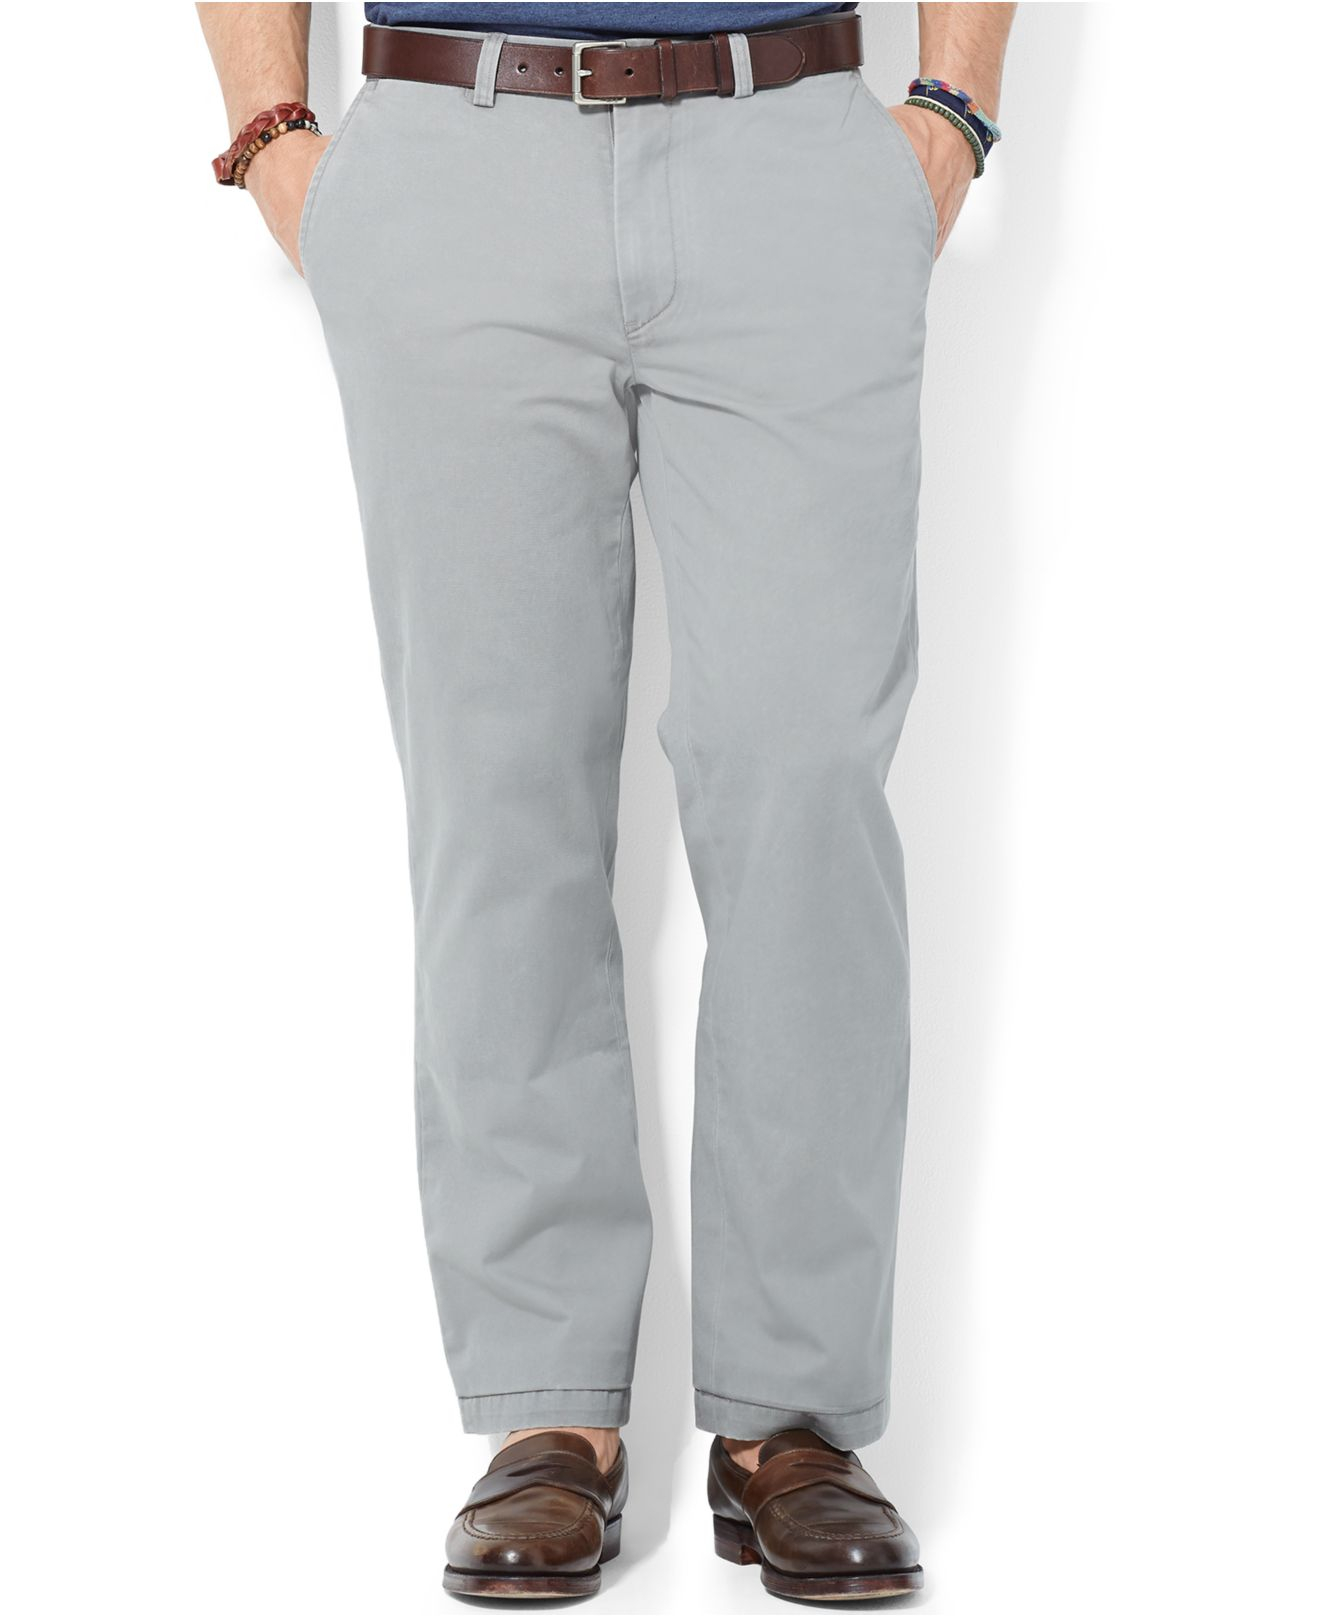 polo chino pants classic fit